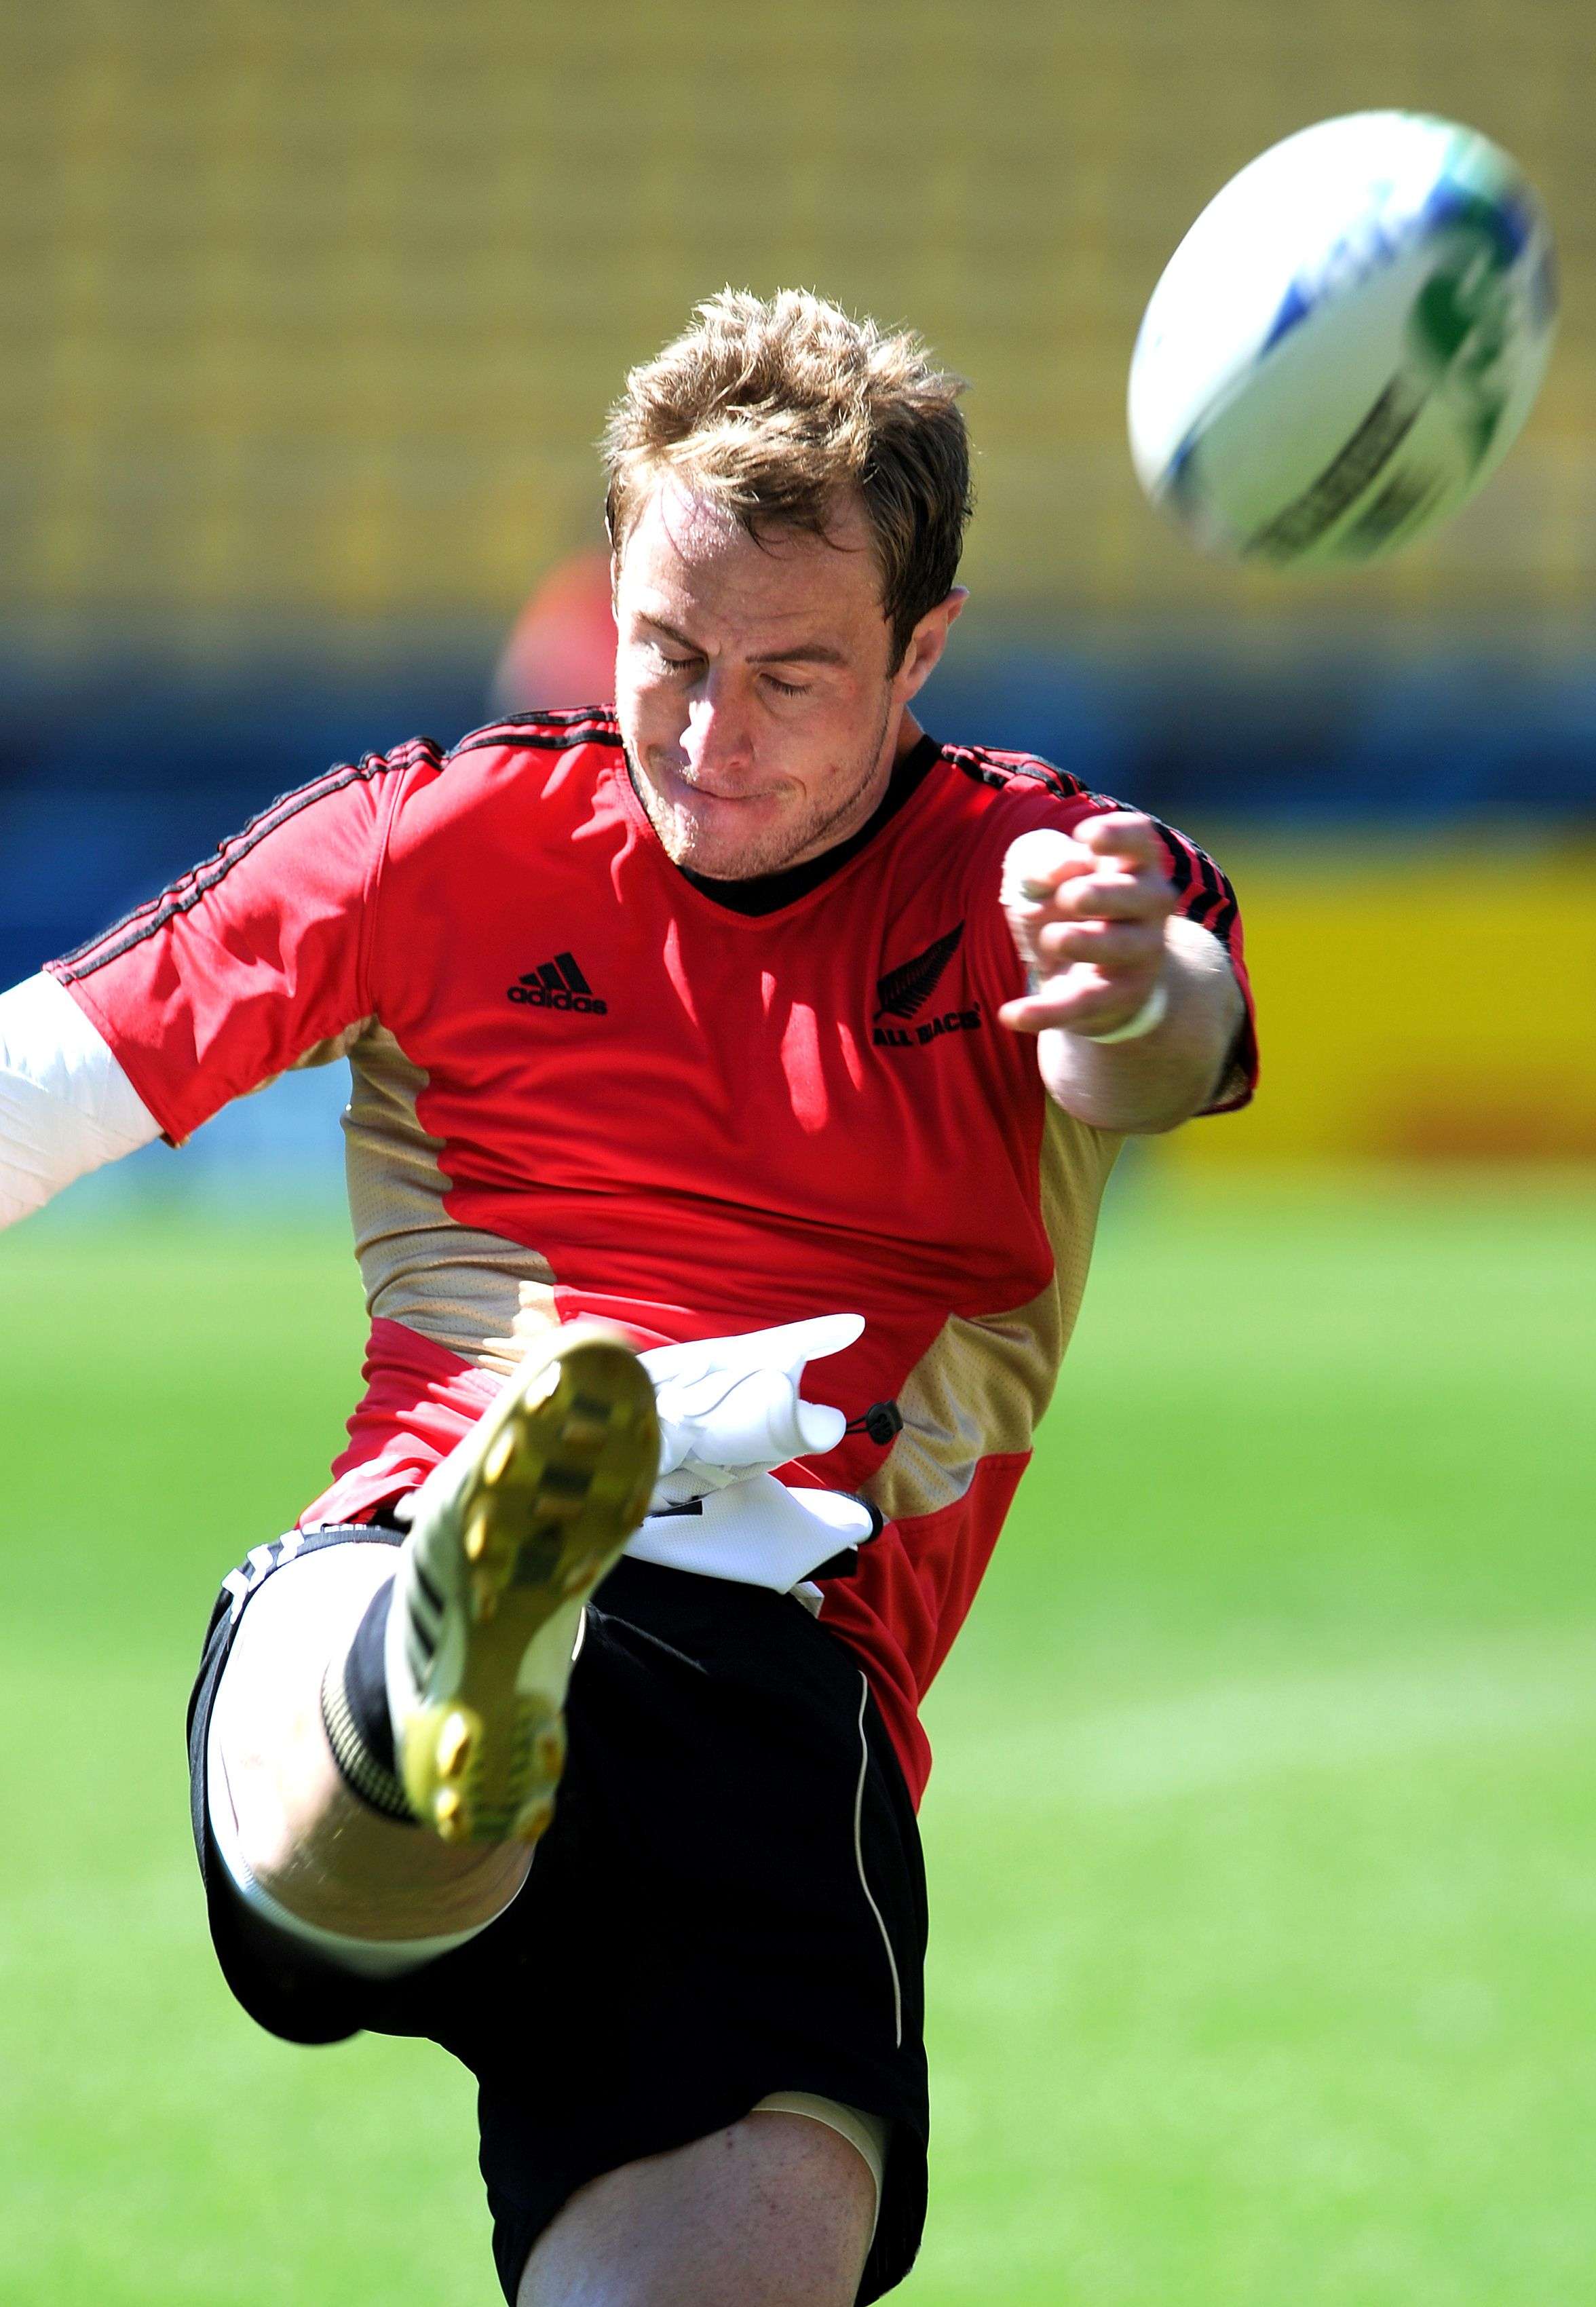 Jimmy Cowan, who won 51 caps for the All Blacks and was still playing Super Rugby last year, will make his debut at next week’s GFI HKFC Tens. Photo: AFP